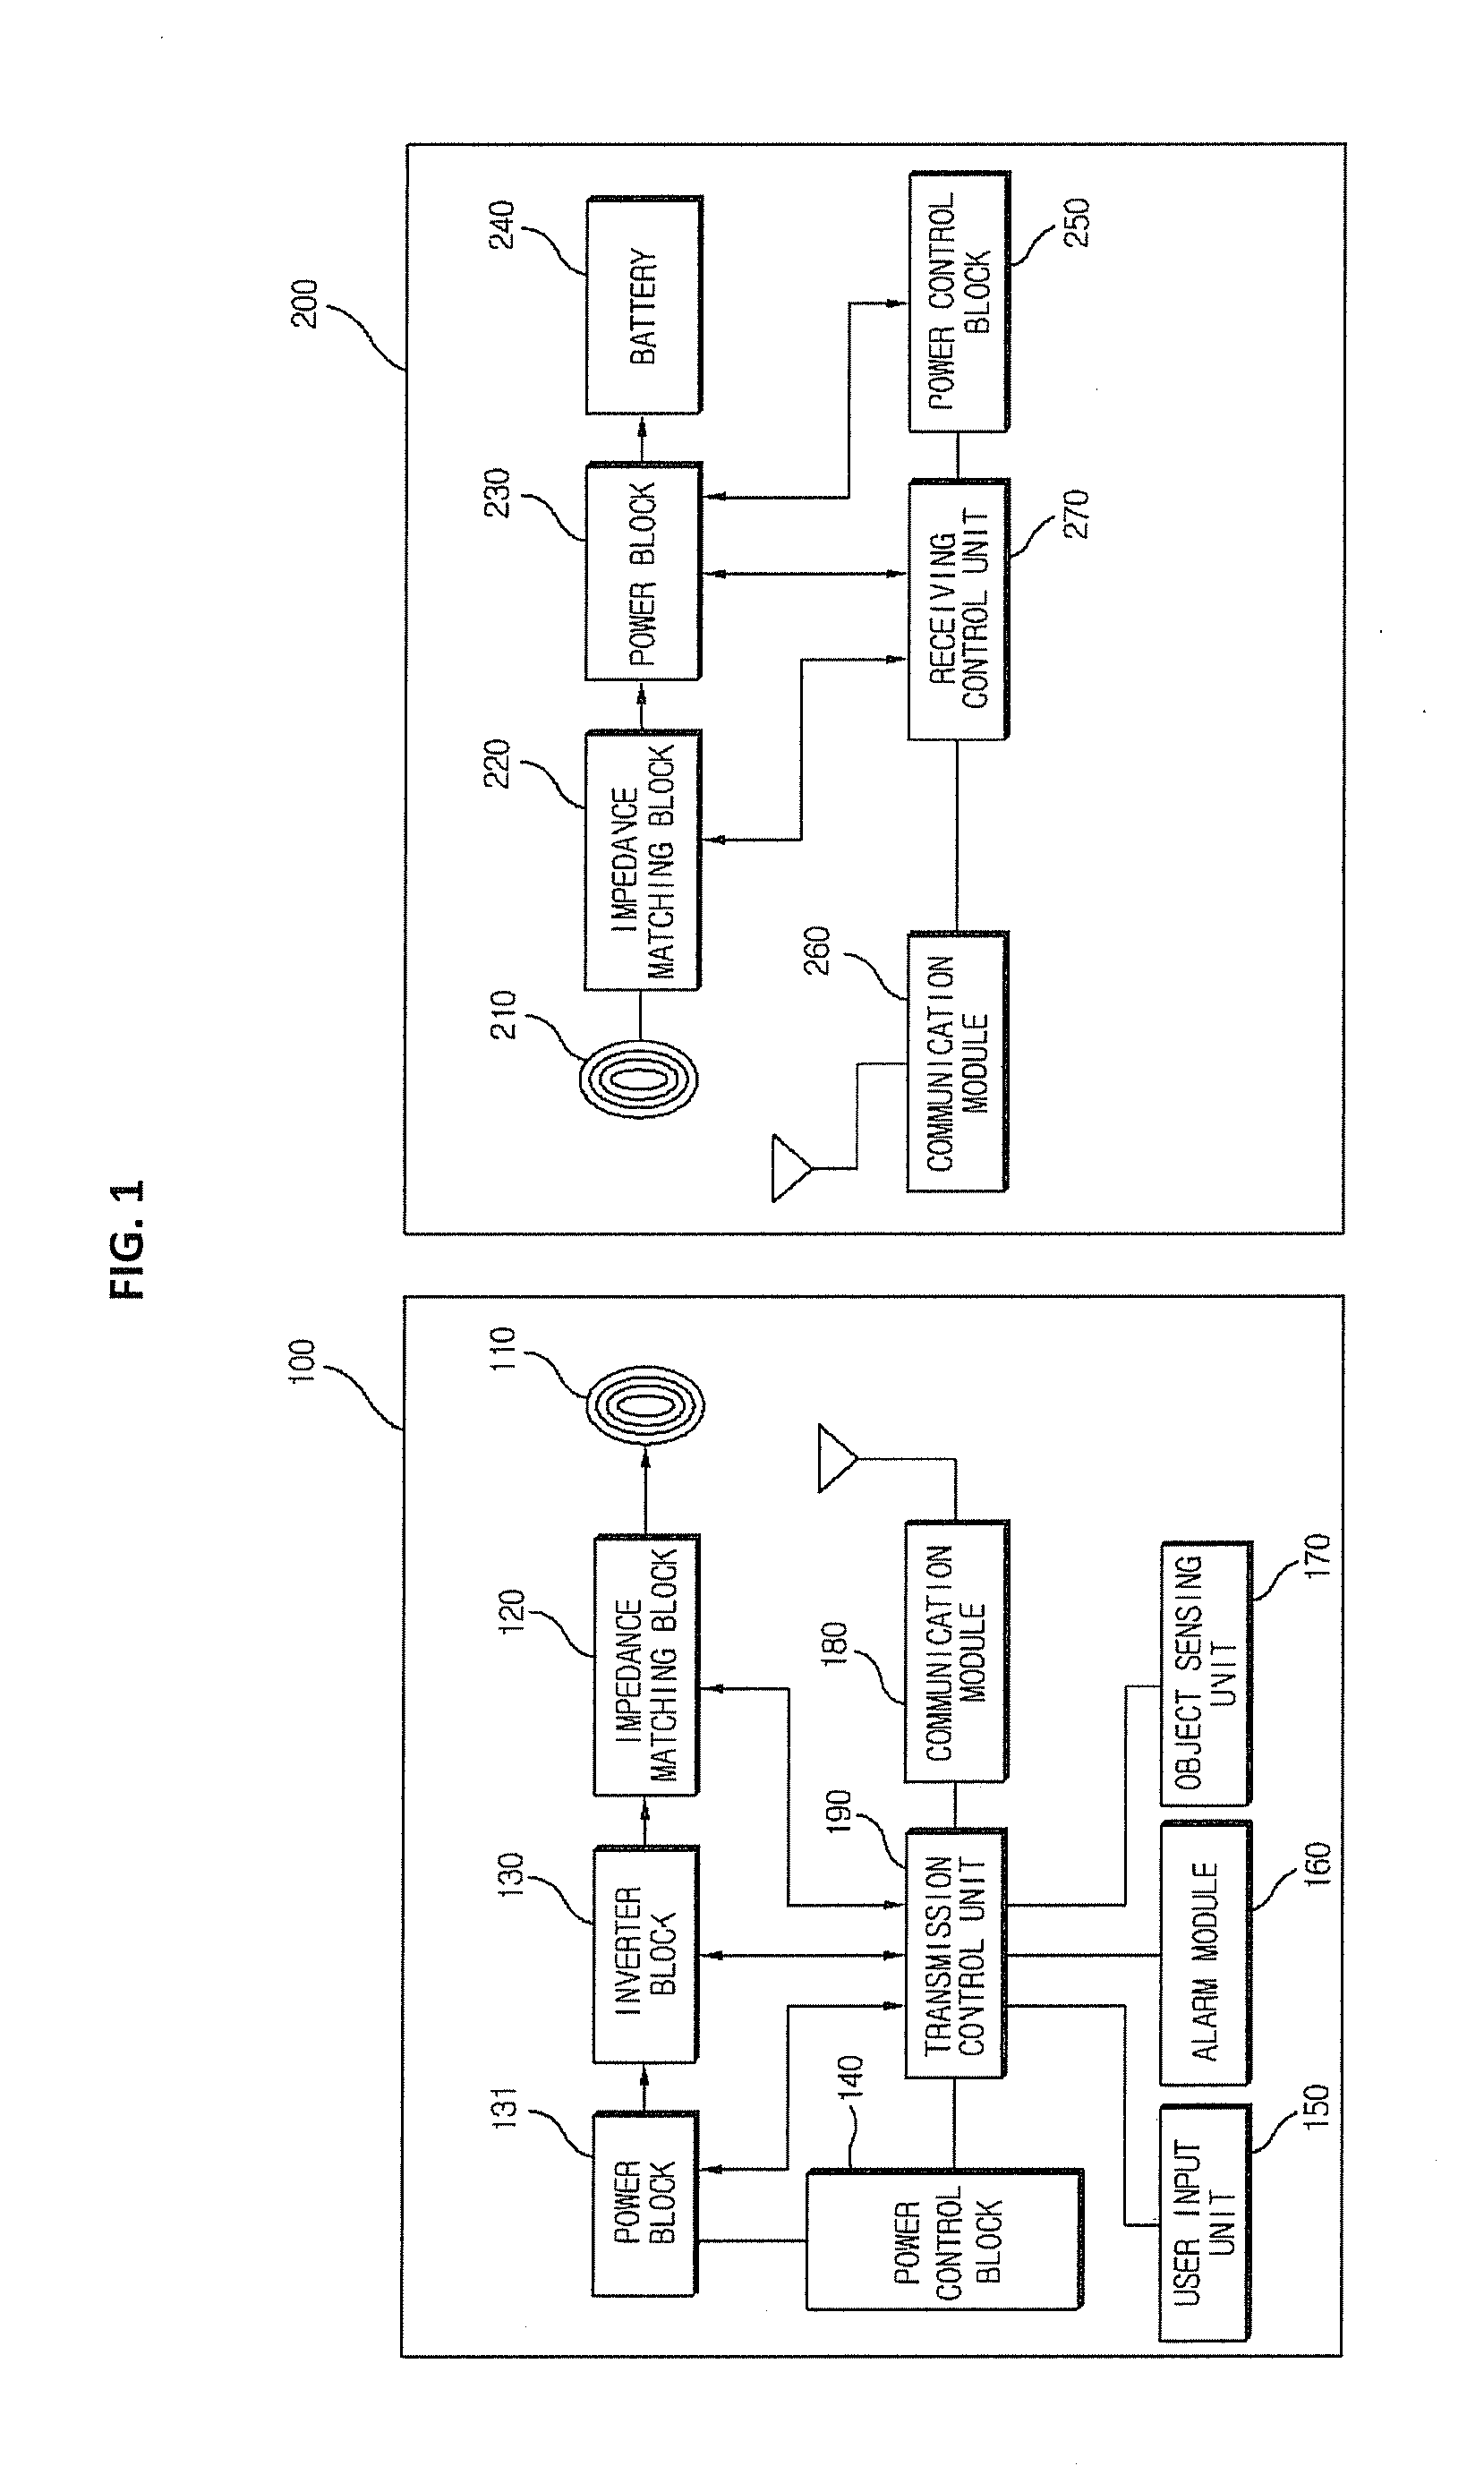 Wireless power control method, system, and apparatus utilizing a wakeup signal to prevent standby power consumption